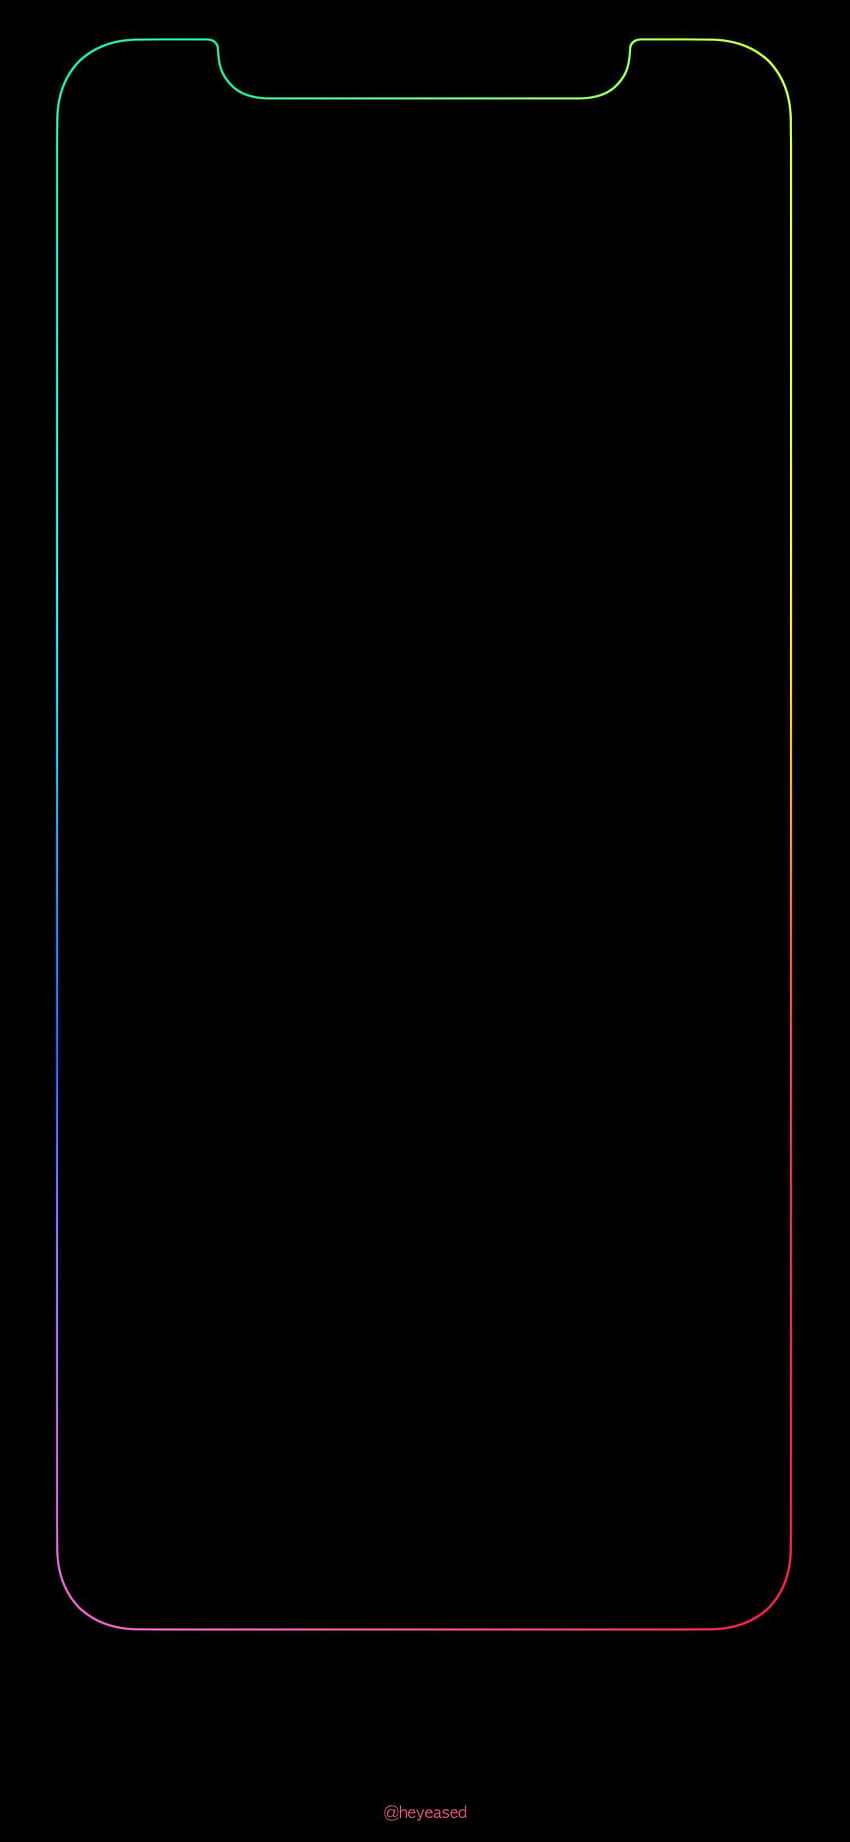 Can we get a thread going for iPhone XS max ? : iphone, dope black android HD phone wallpaper